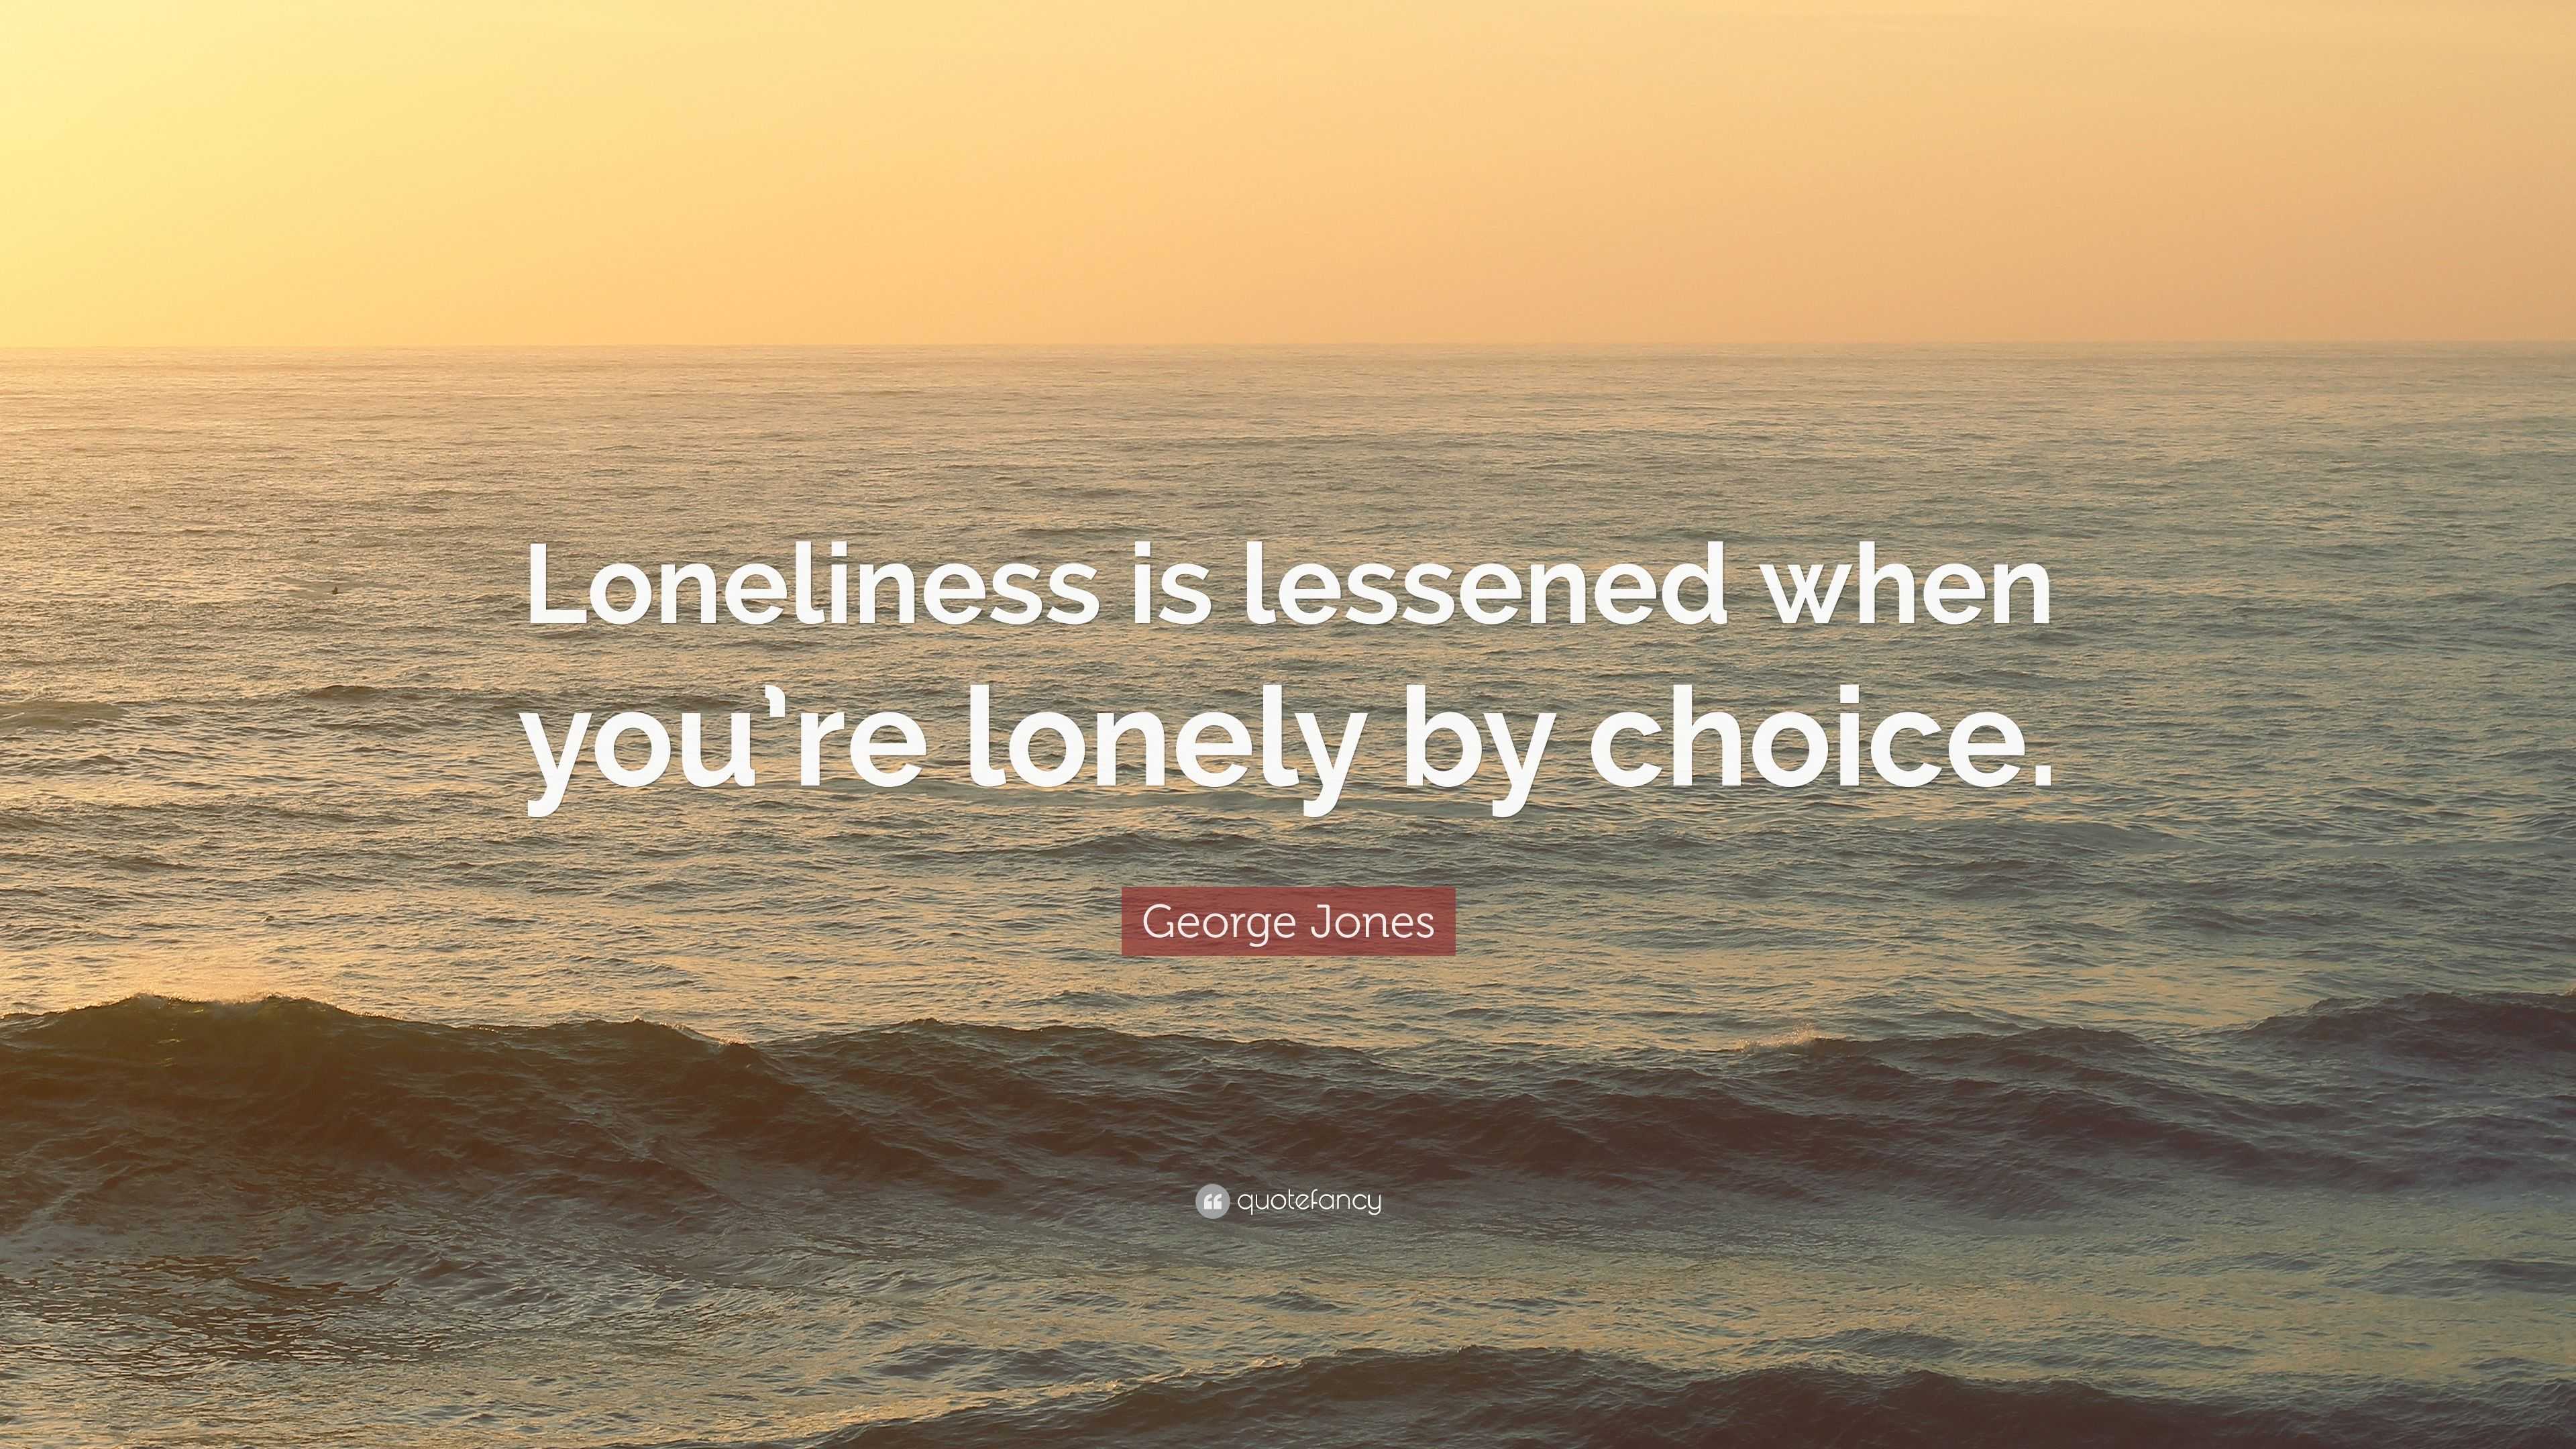 George Jones Quote: “Loneliness is lessened when you’re lonely by choice.”